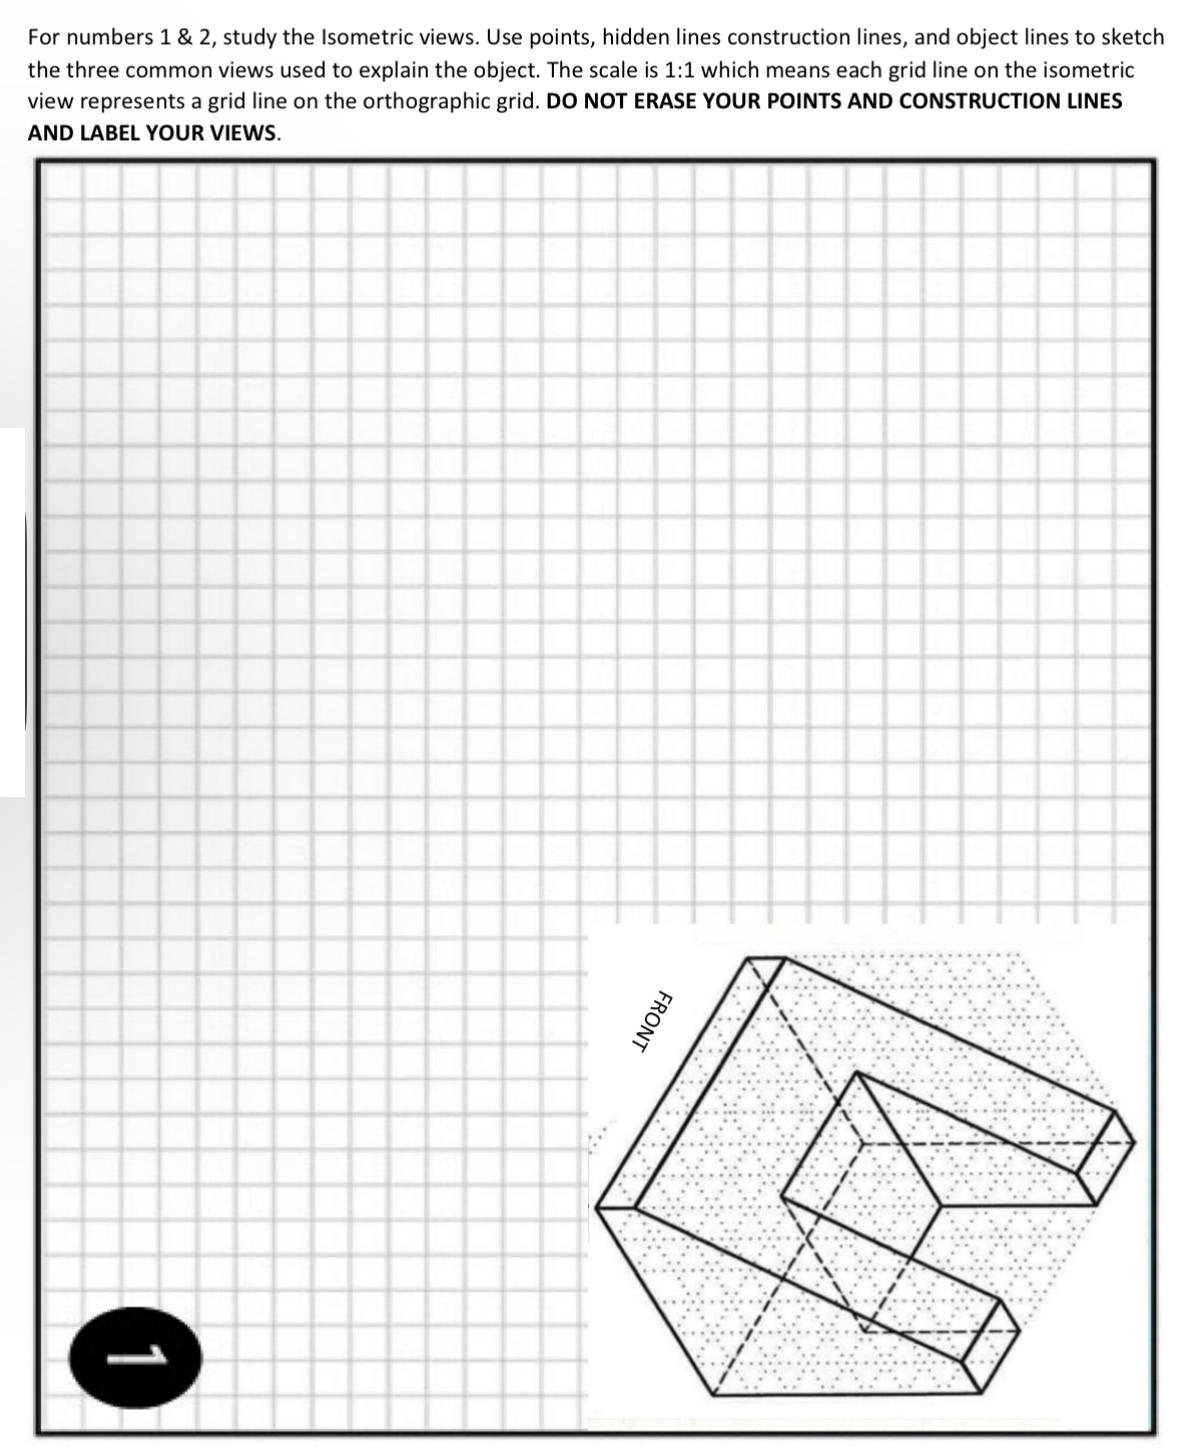 For numbers 1 & 2, study the Isometric views. Use points, hidden lines construction lines, and object lines